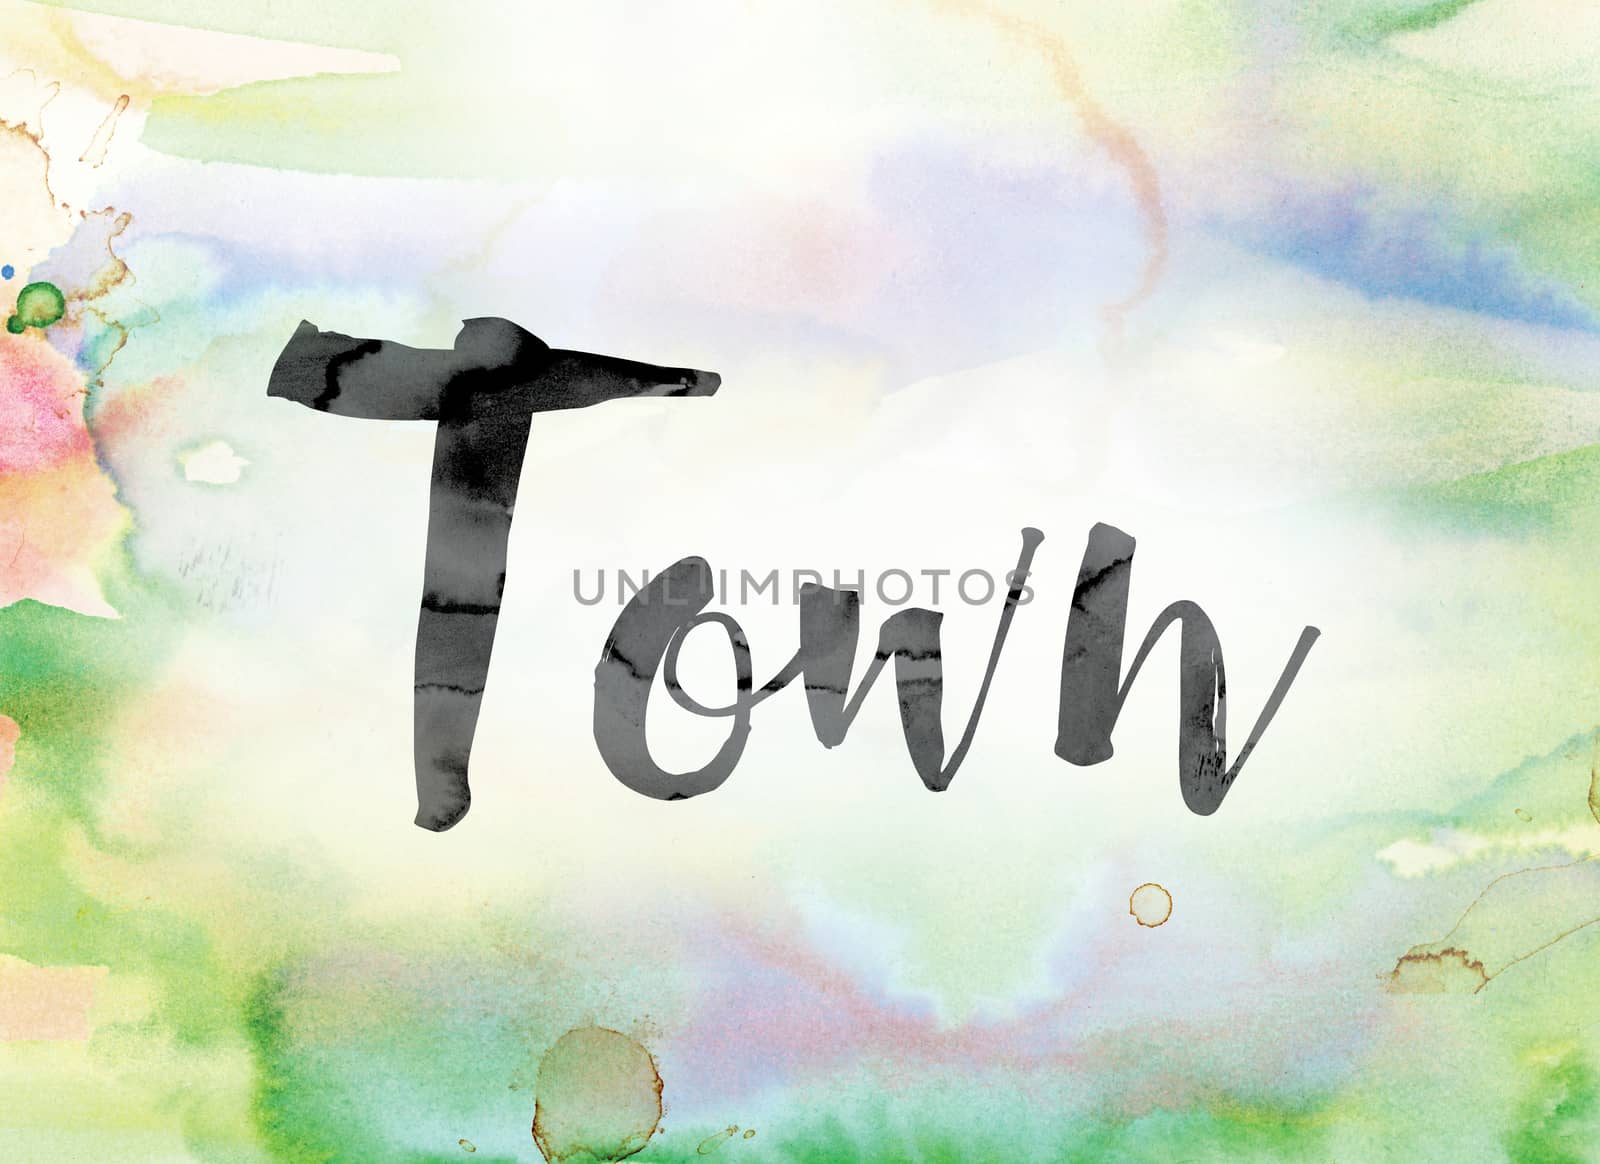 The word "Town" painted in black ink over a colorful watercolor washed background concept and theme.